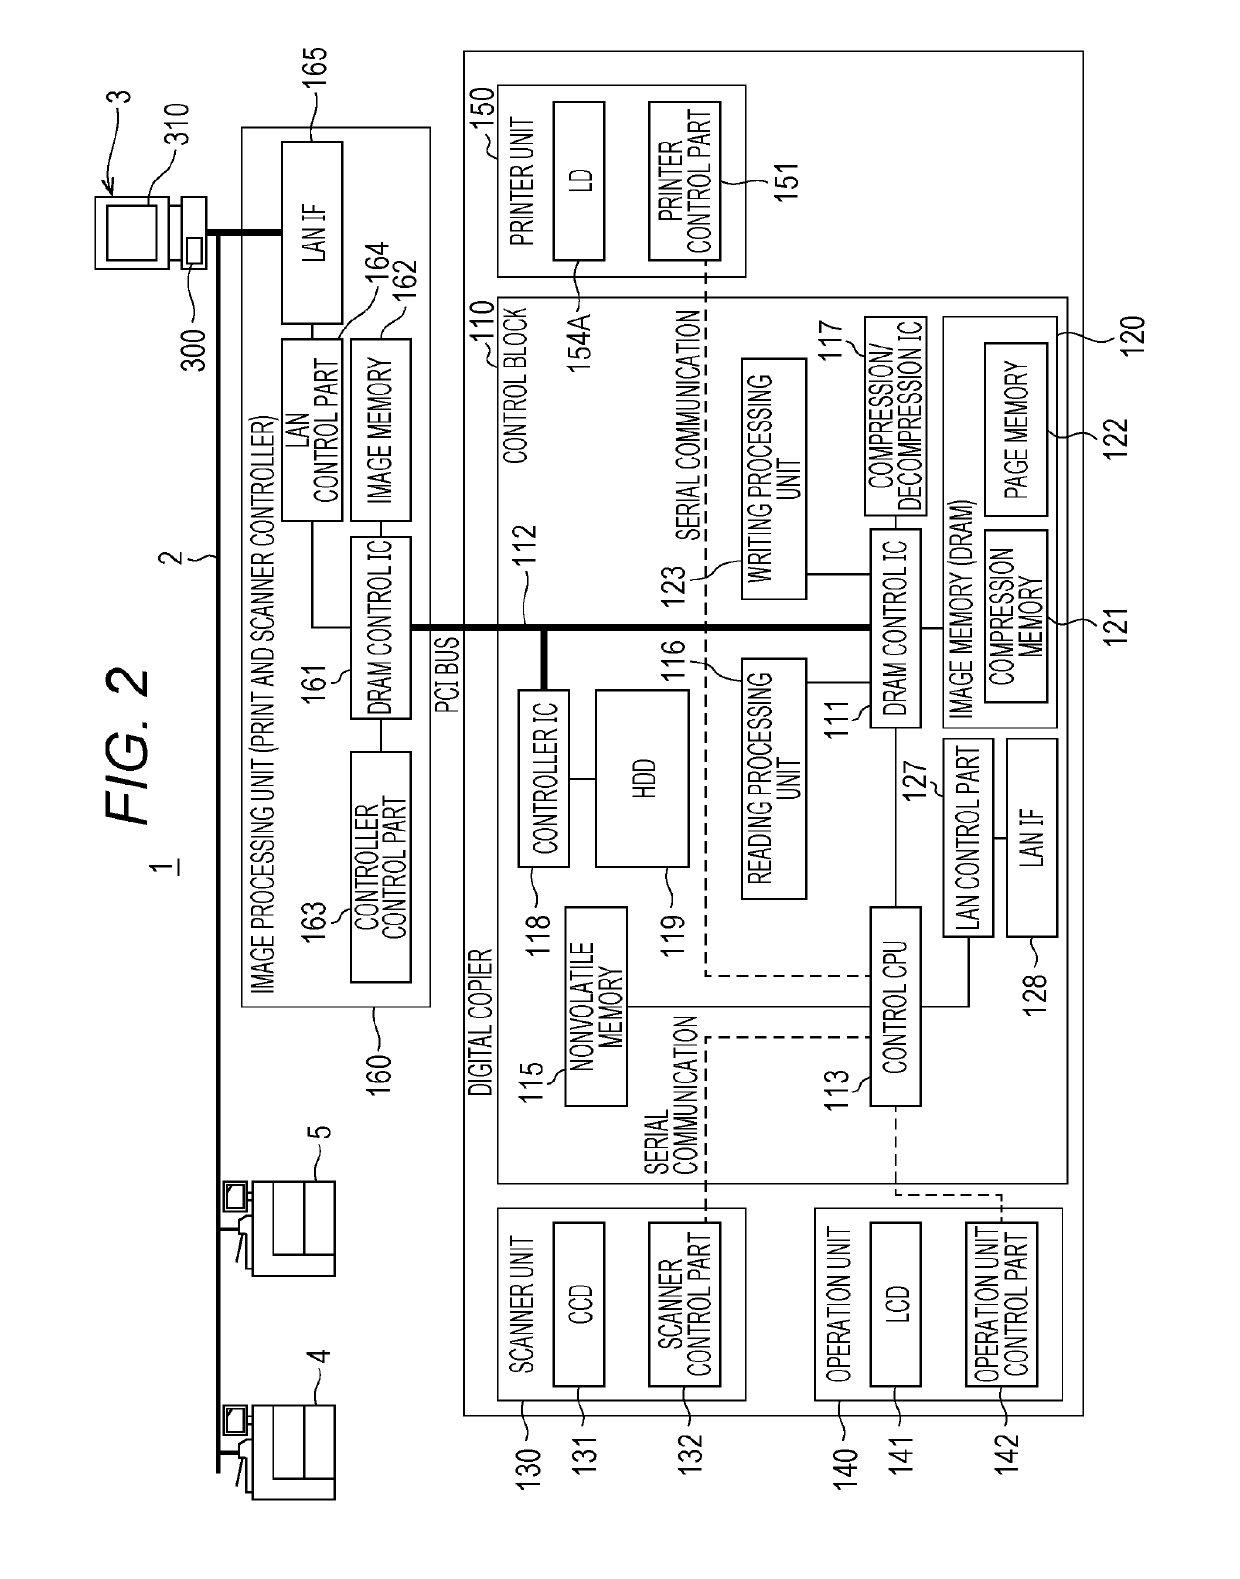 Image forming apparatus, image inspection apparatus, and program